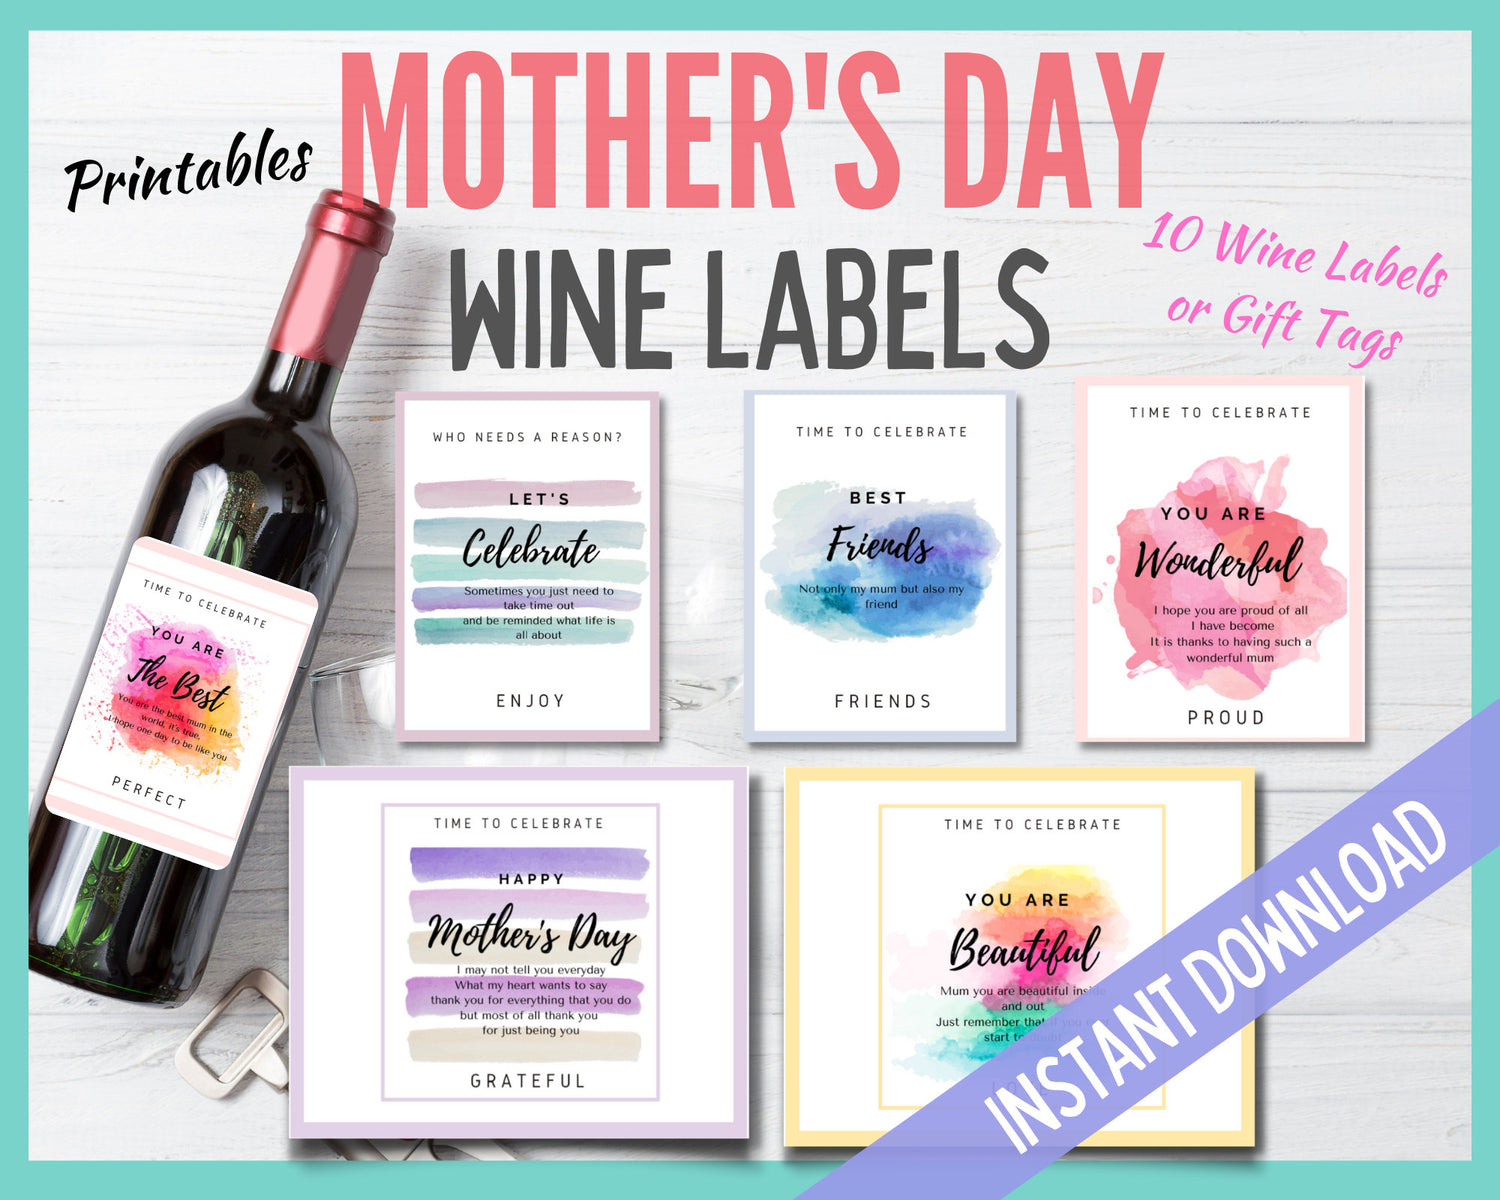 Mothers day printable wine labels and gift tags